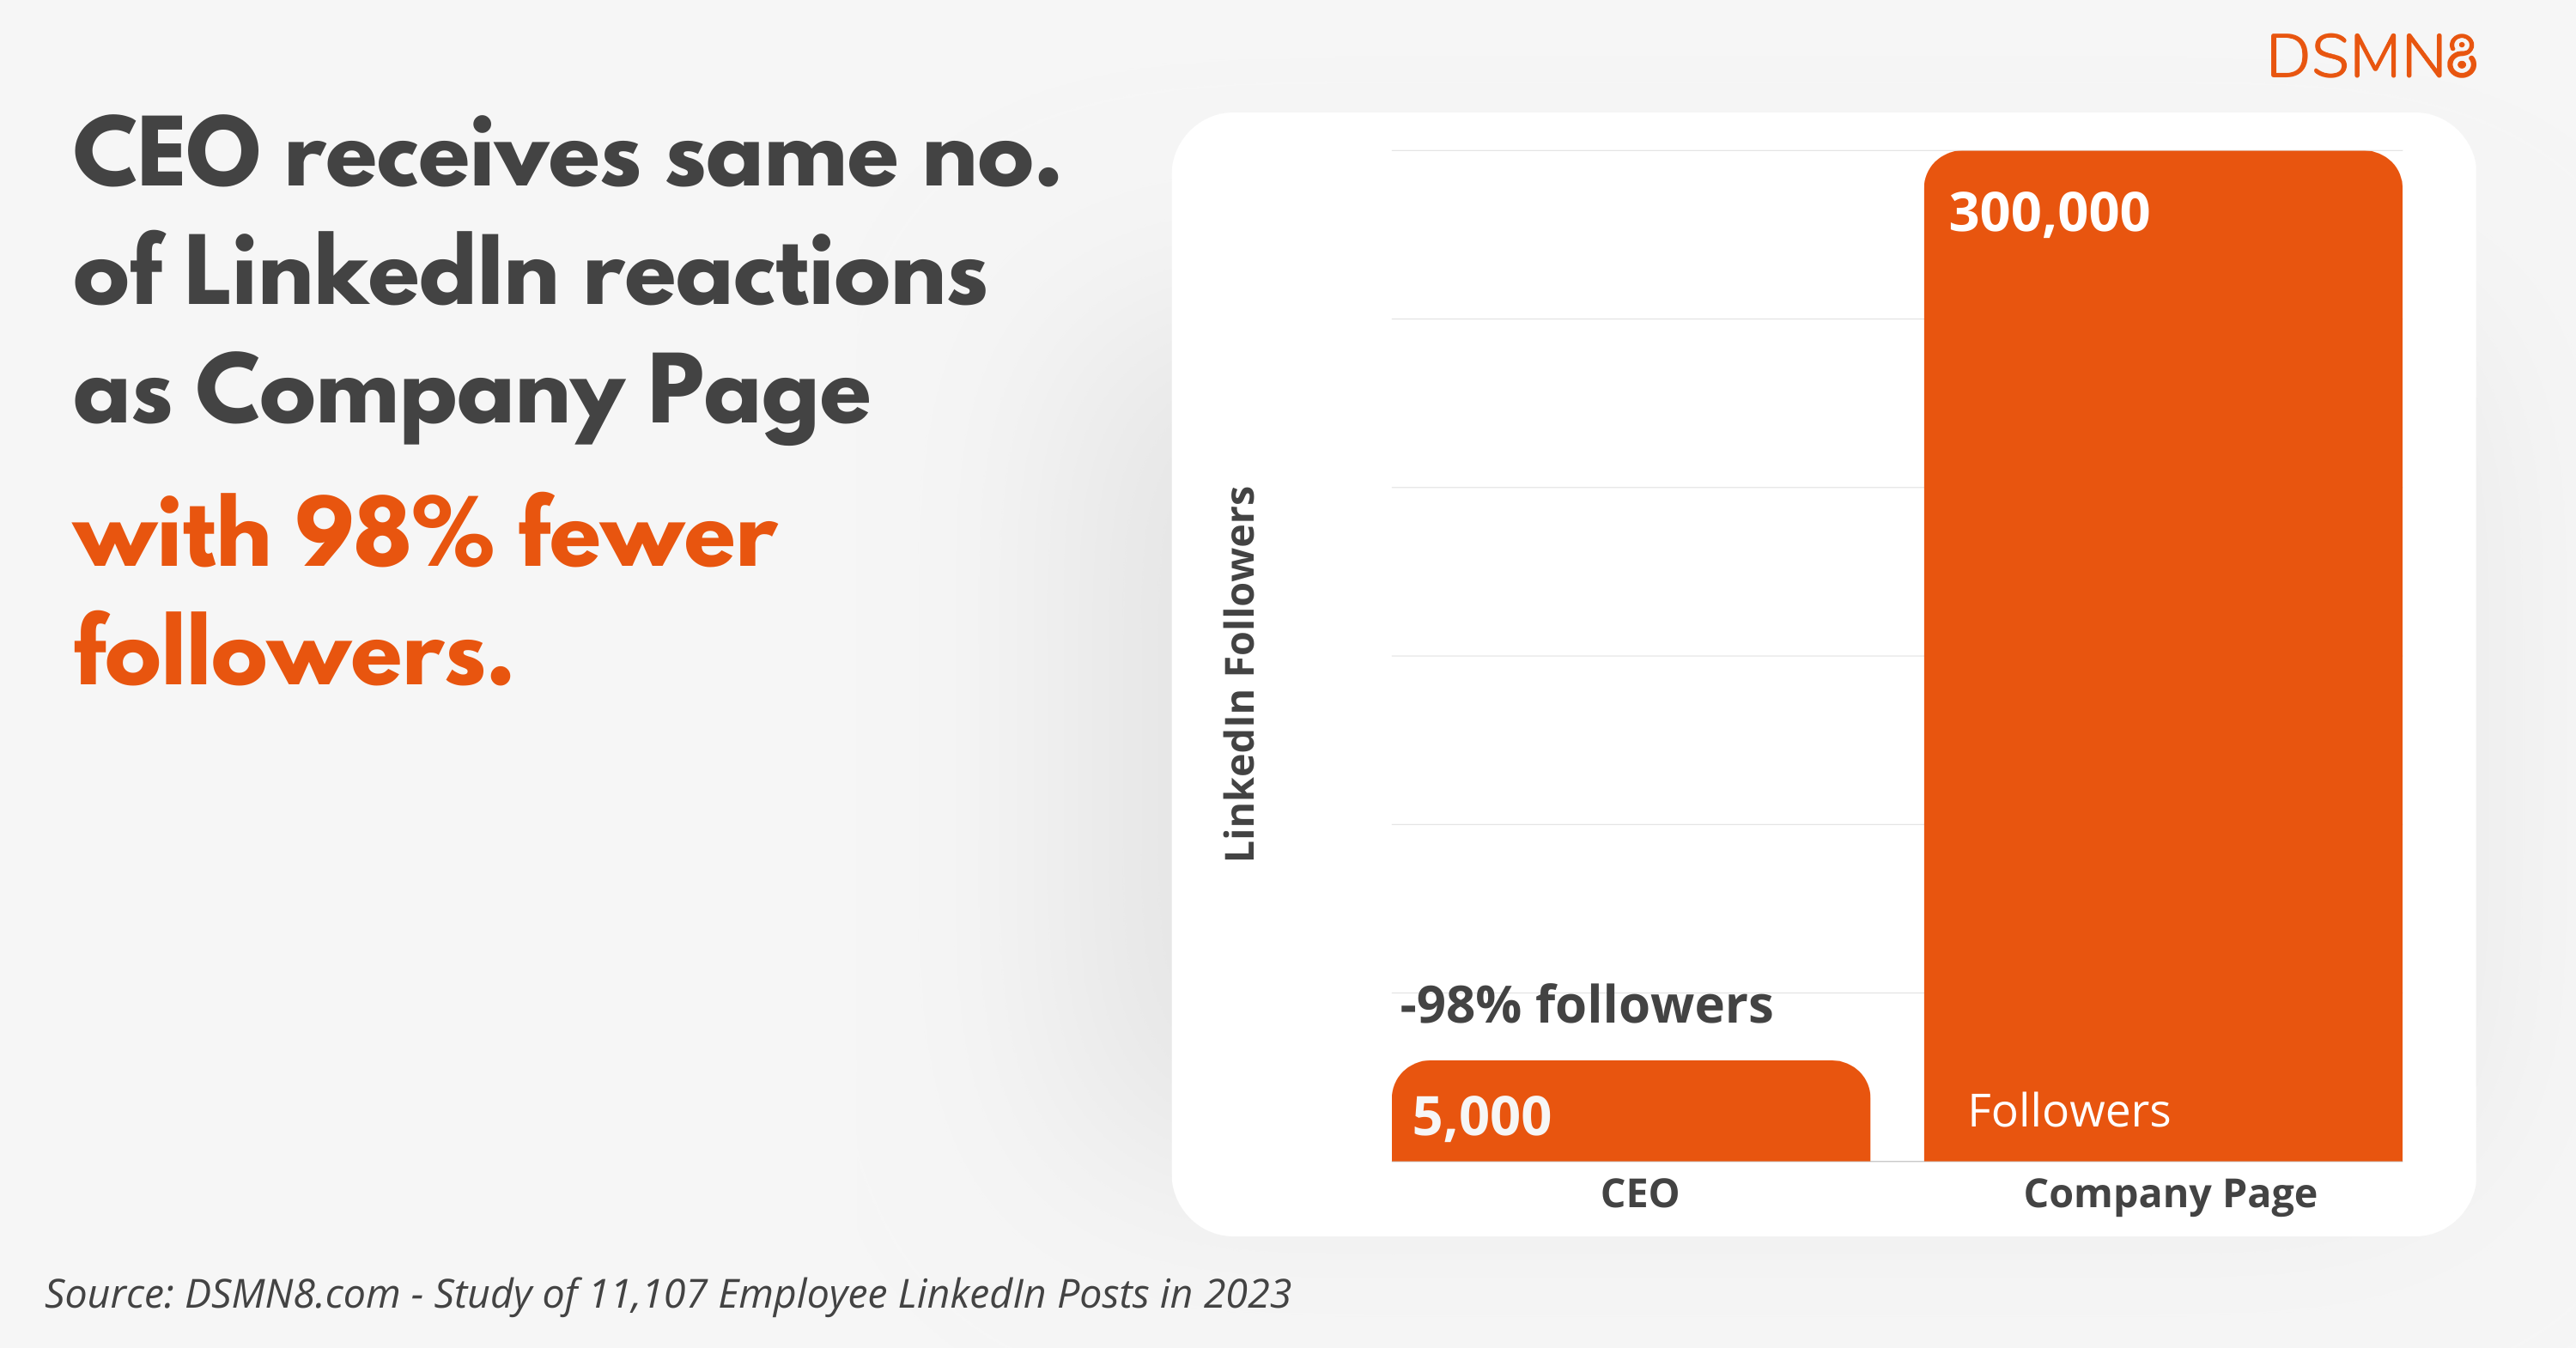 CEO receives same no of LinkedIn reactions as company page with 98% fewer followers